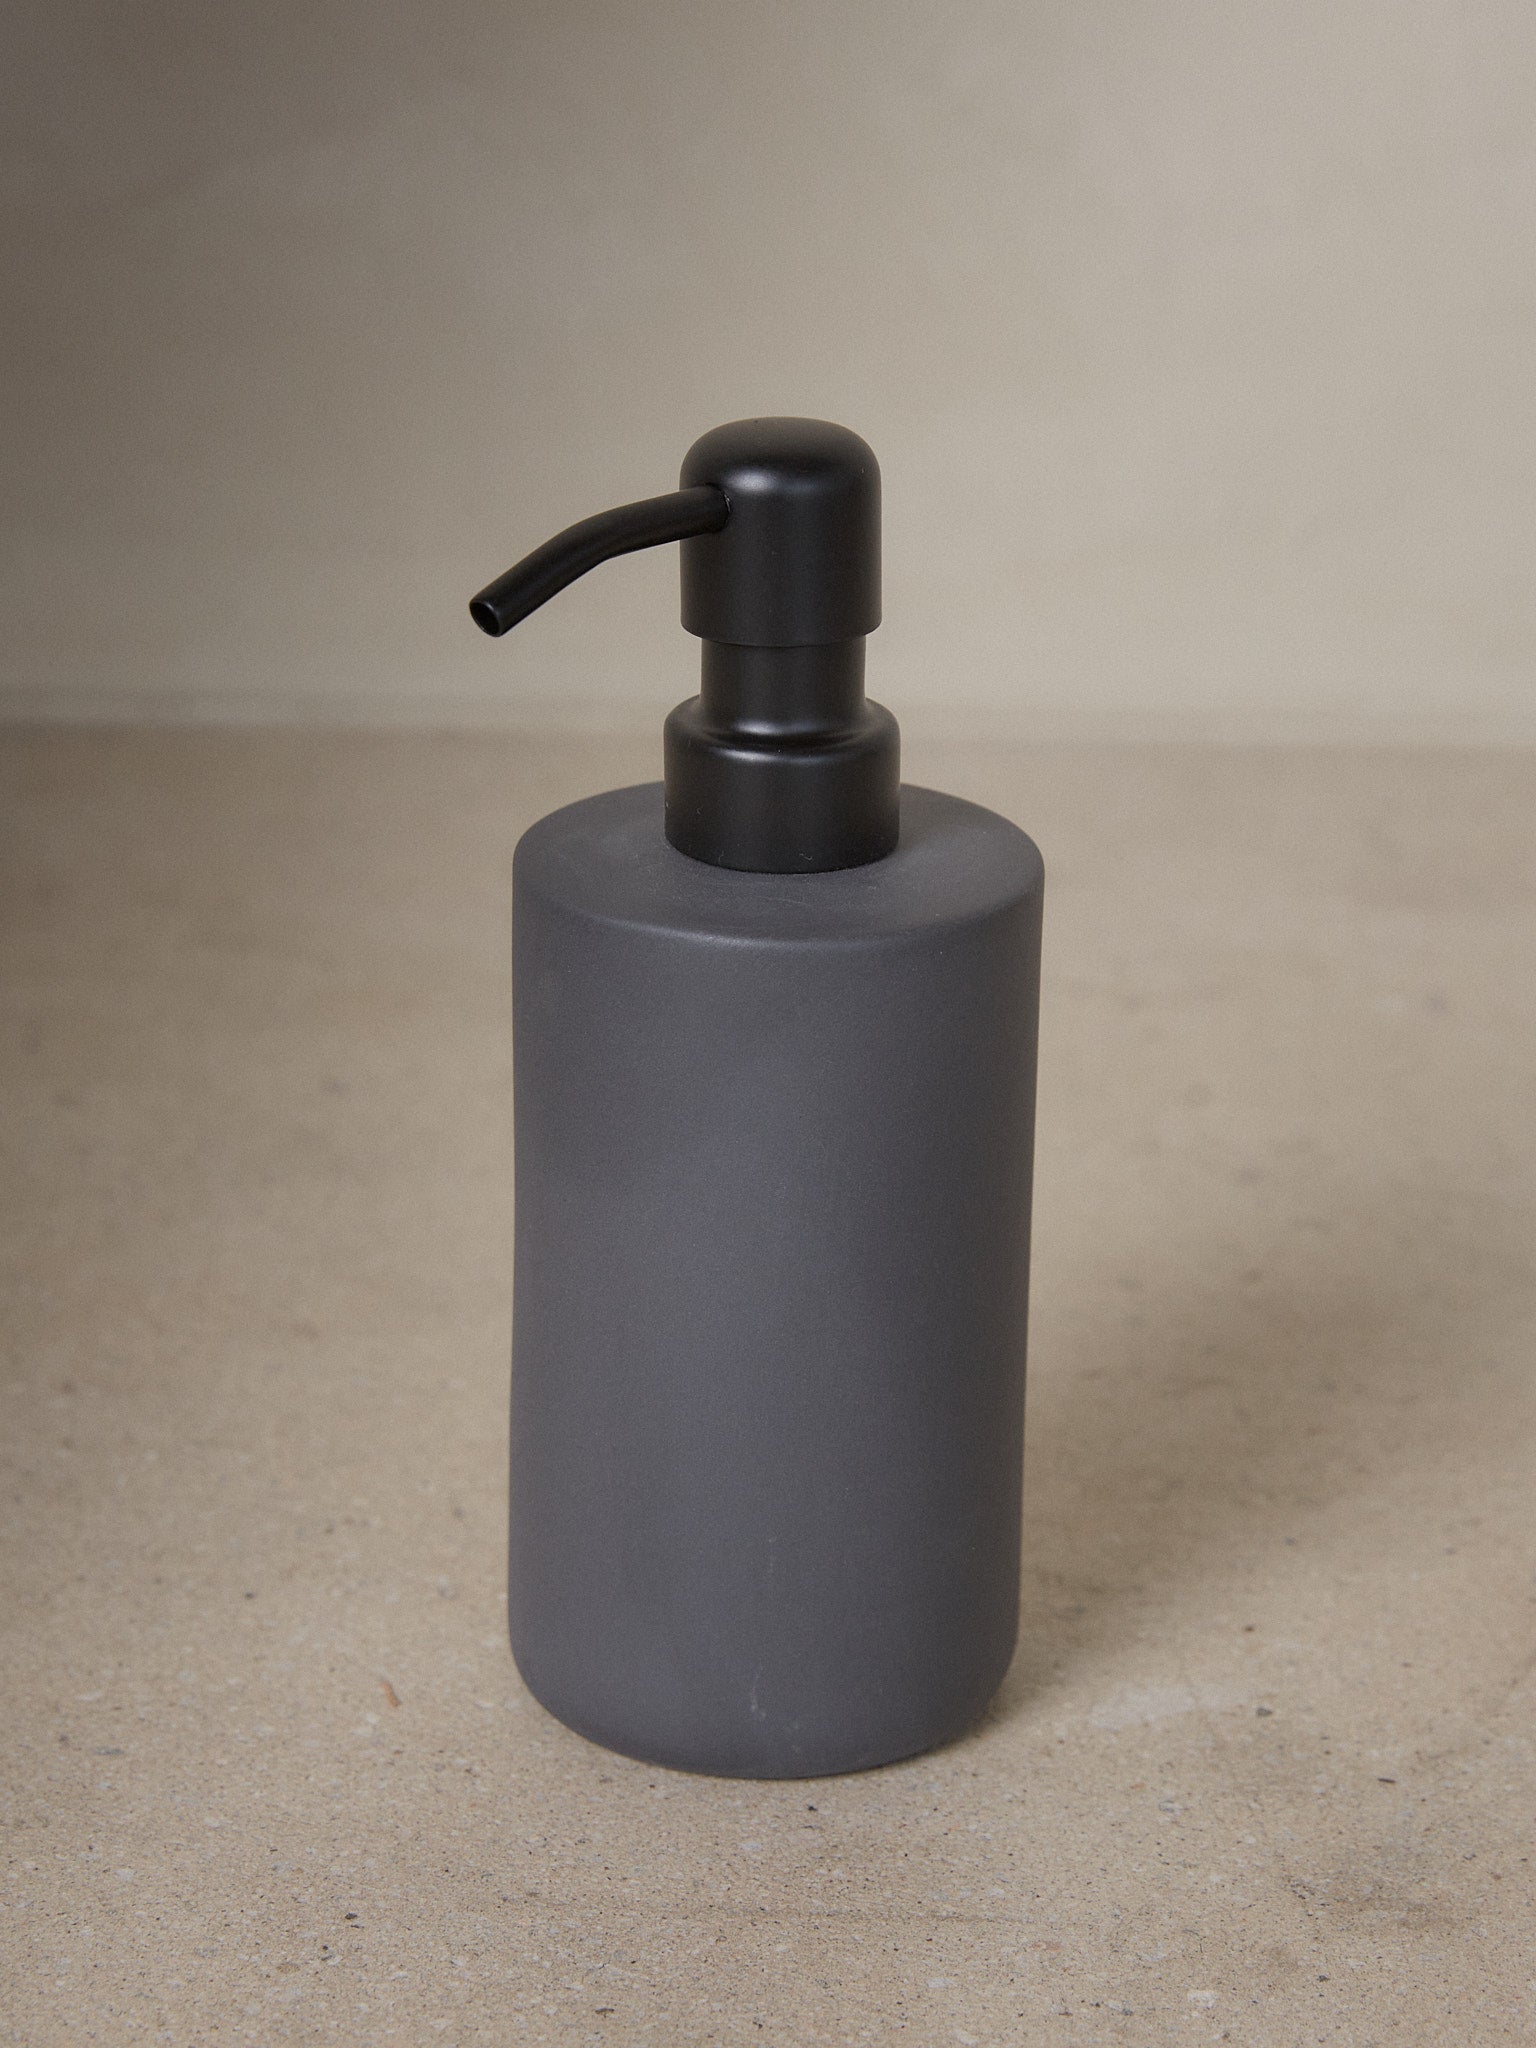 Dark Grey Cose Soap Dispenser. A study in refined simplicity, the Cose Soap Dispenser by Bertrand Lejoly for Serax adds subtle luxury to any bathroom or kitchen. 